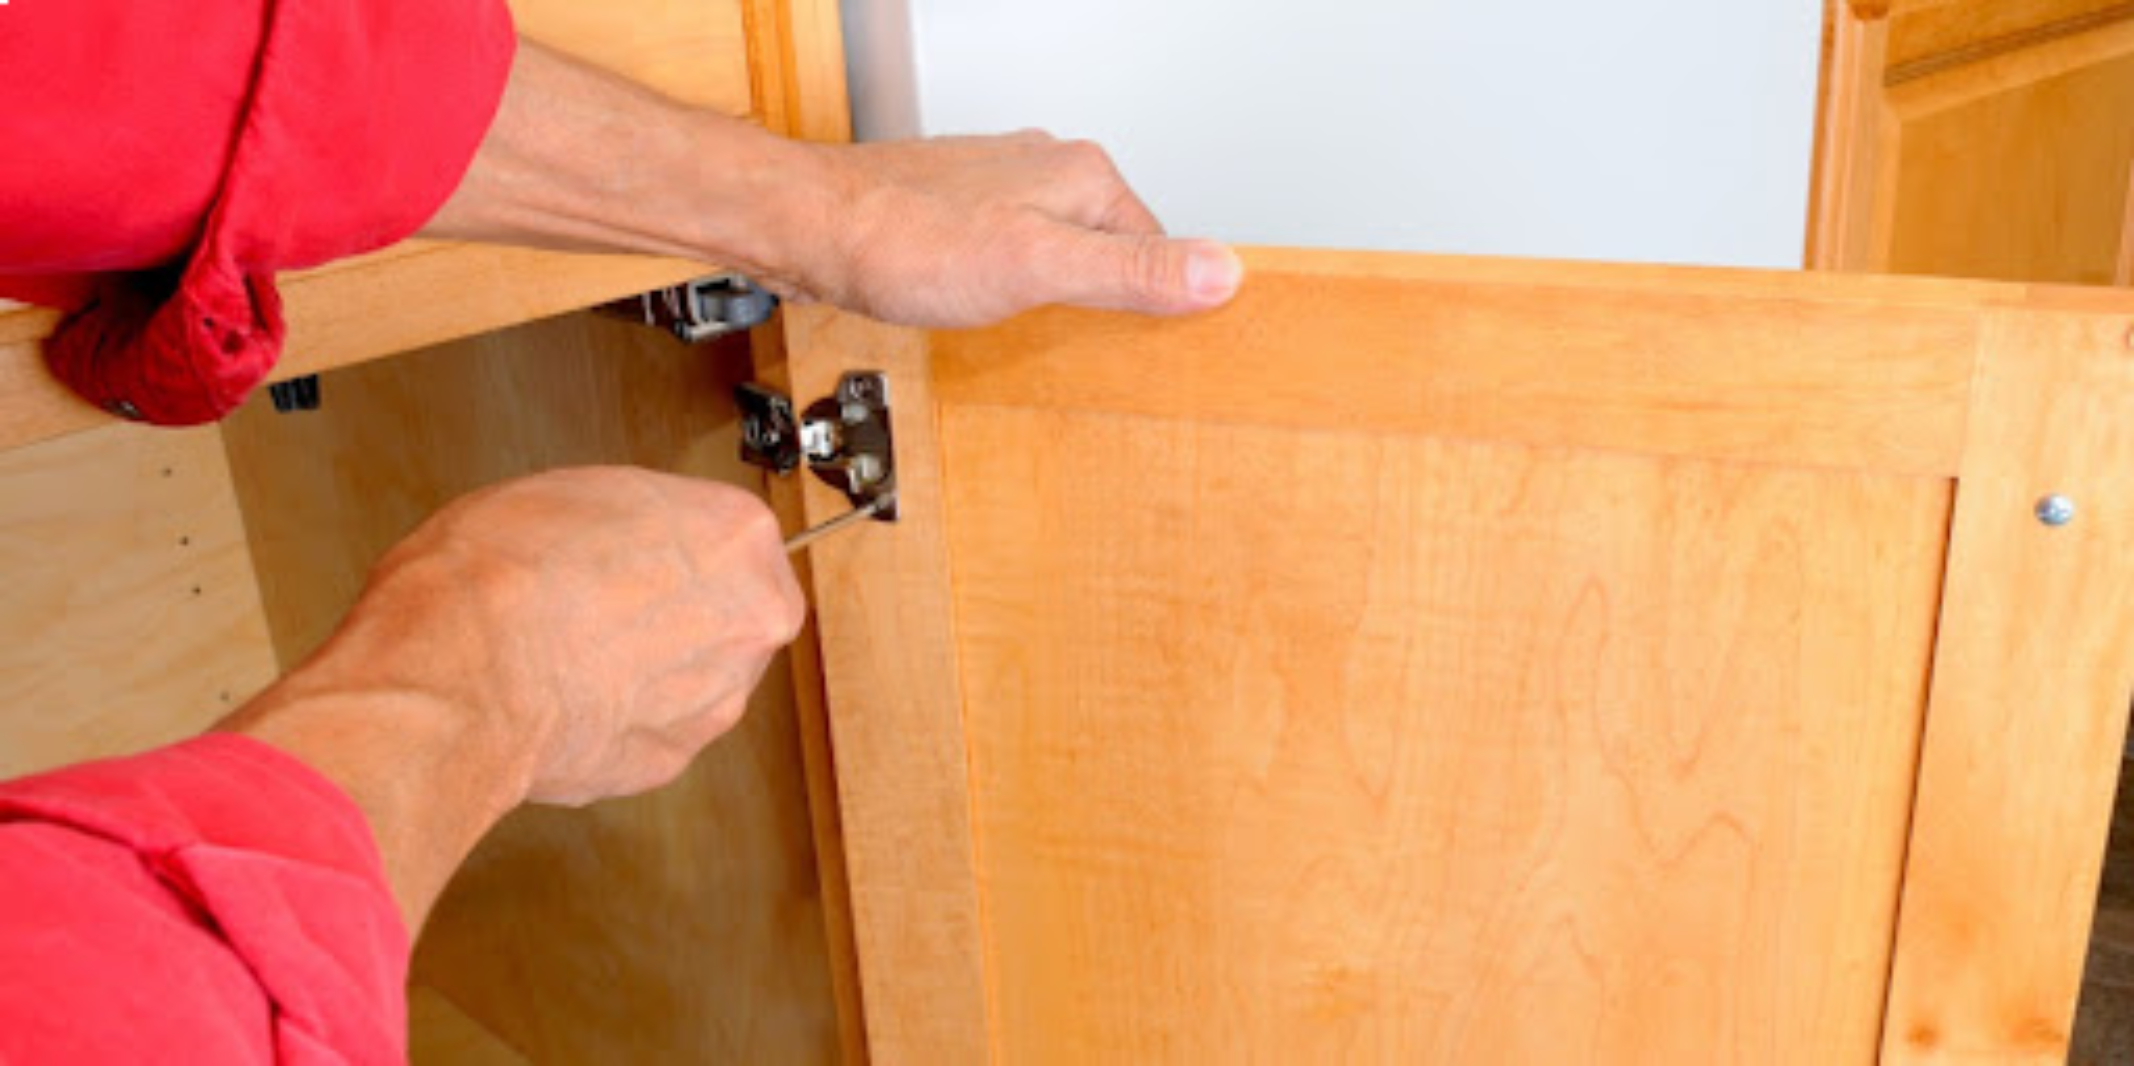 A handyman using a screwdriver to fix hinges on the cabinet doors in a residential kitchen.